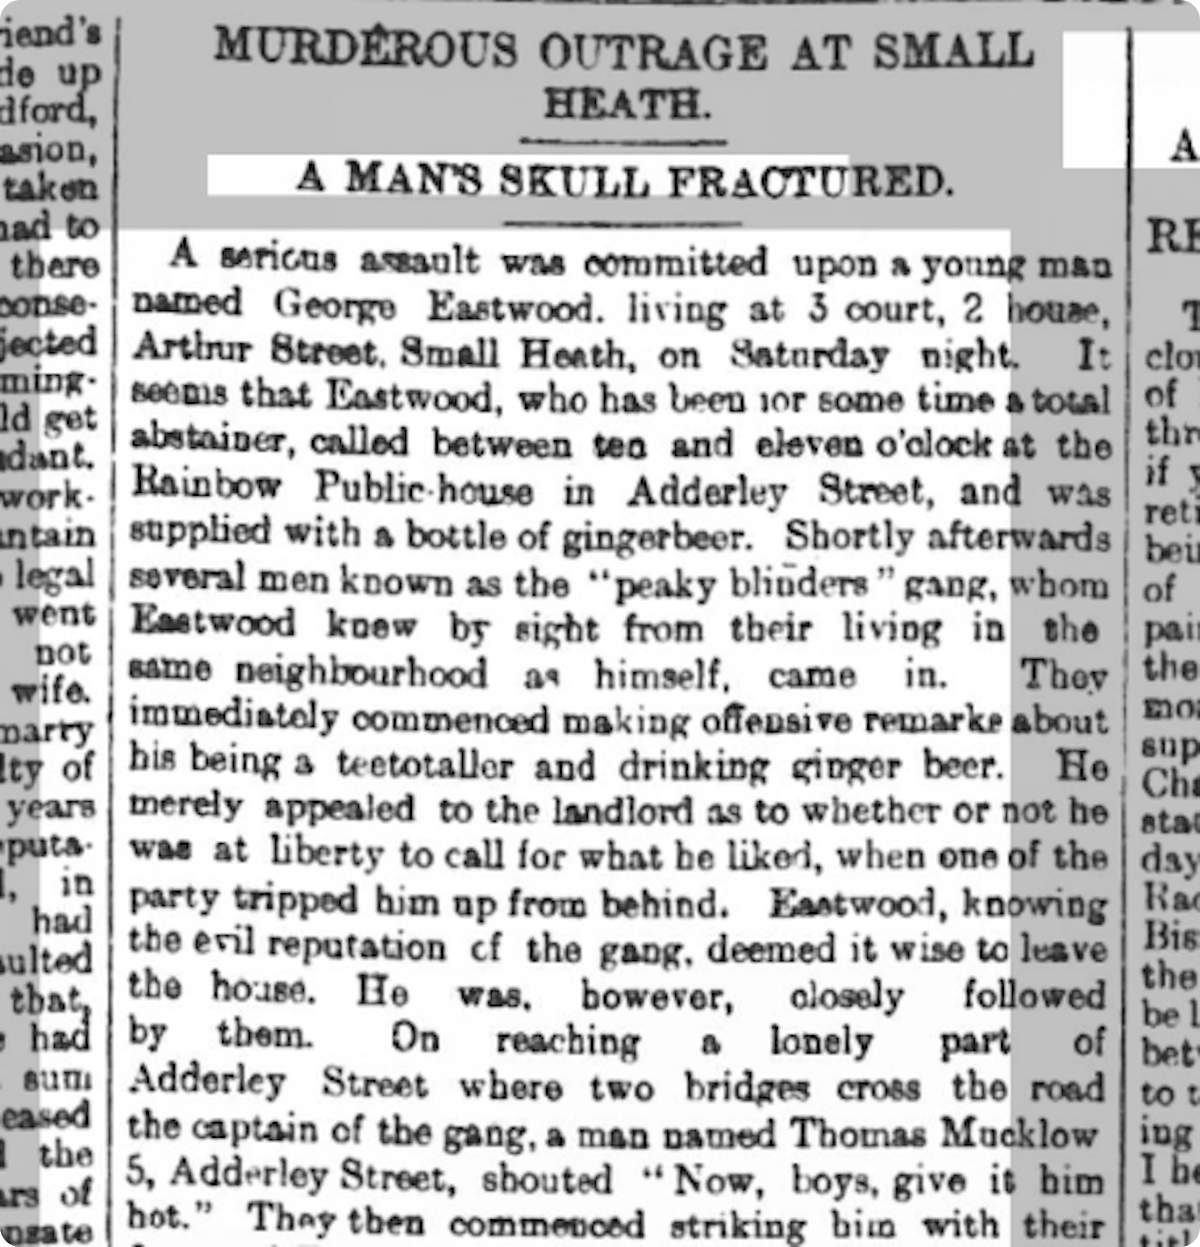 An early mention of the Peaky Blinders and Thomas Mucklow in the Birmingham Mail, 24 March 1890.